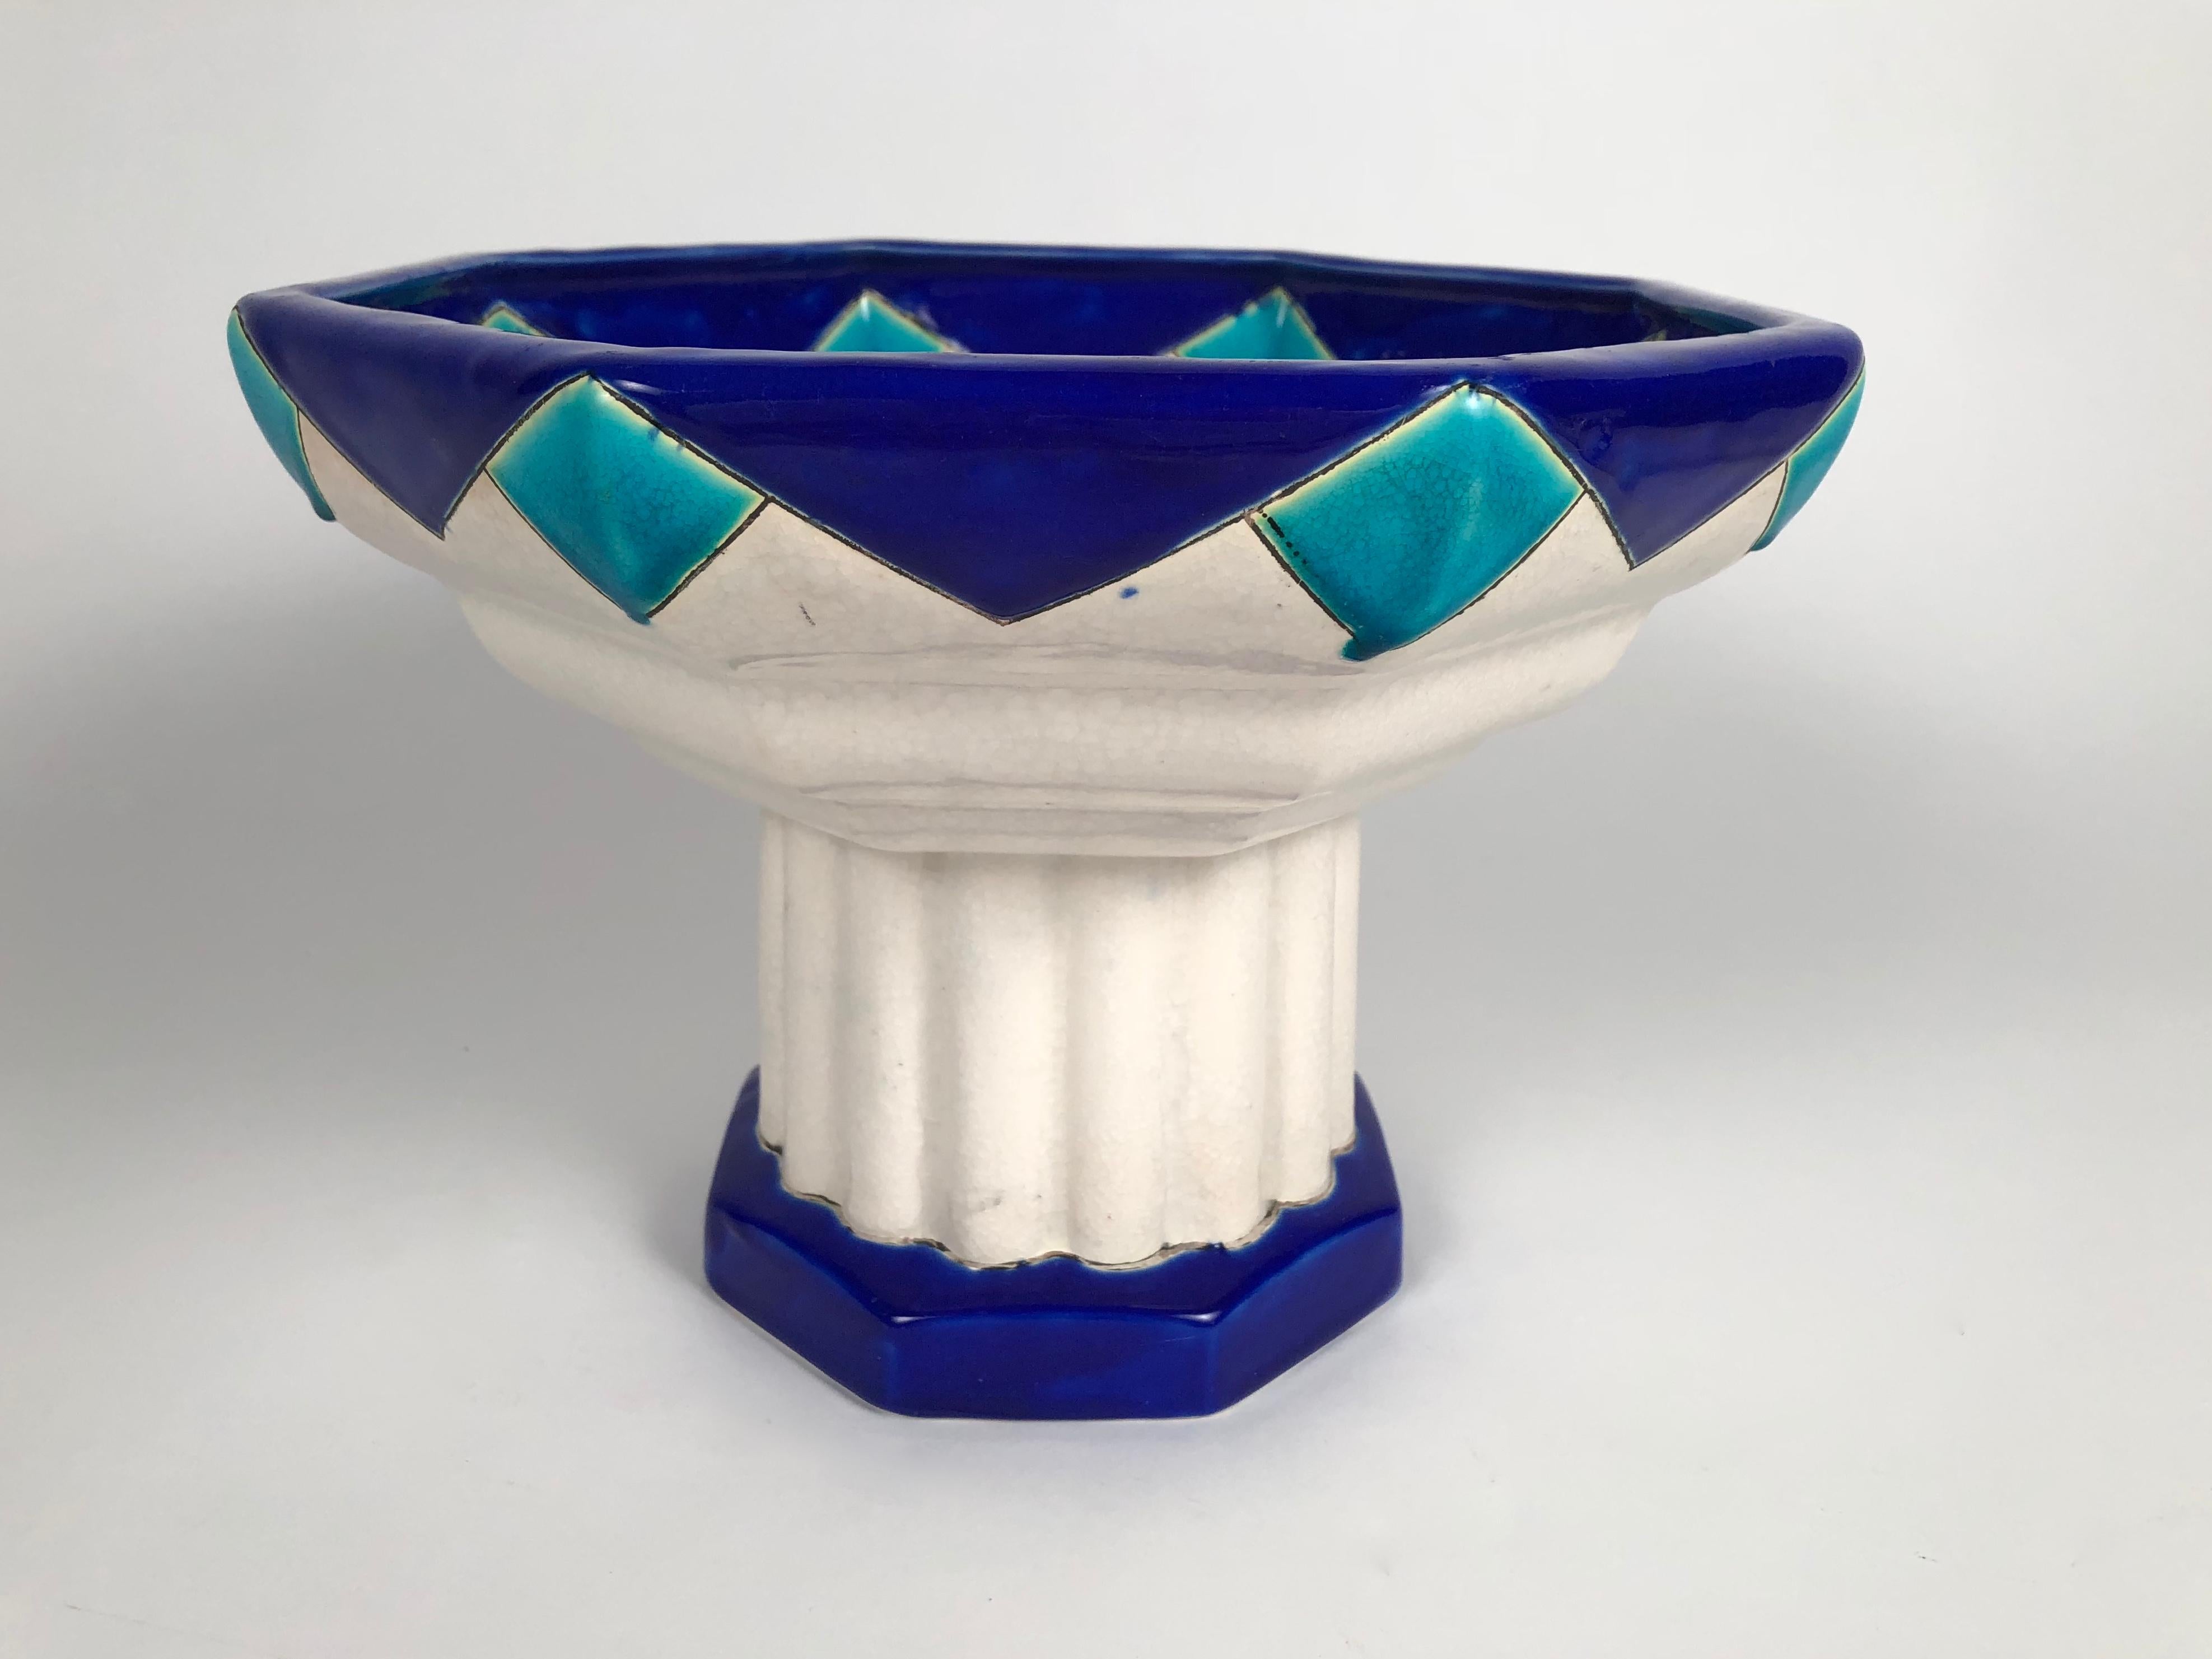 An Art Deco period ceramic footed octagonal compote, or footed bowl, by Boch Frères in blue and turquoise enamels. Signed and numbered on base, Belgian, circa 1930s. Perfect for use as a centerpiece on its own or with fruit or flowers.

Measures: